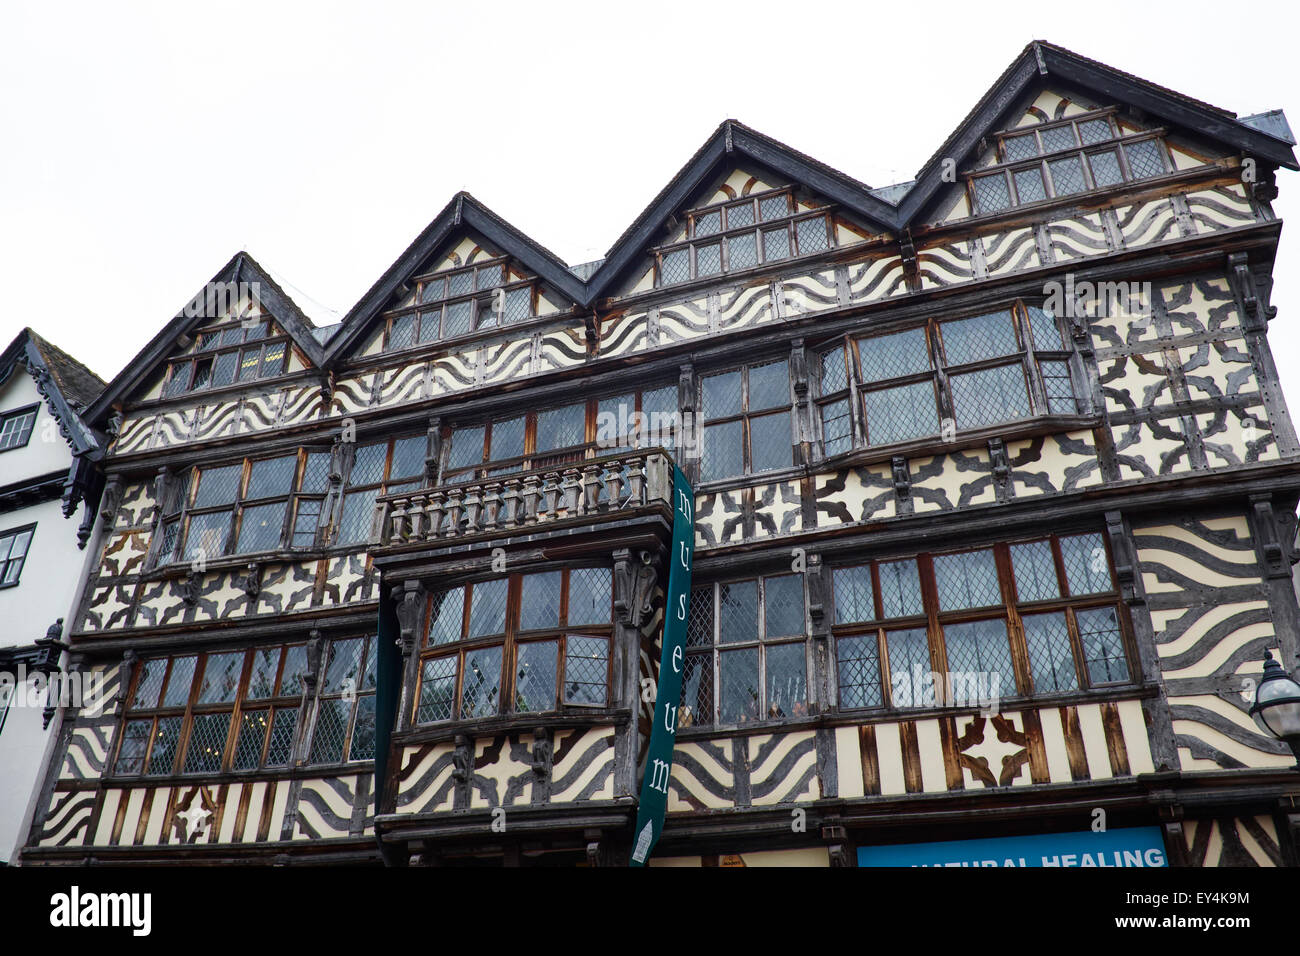 Elizabethan Ancient High House In The Town Centre Is The Largest Timber-Framed Town House In England Stafford Staffordshire UK Stock Photo